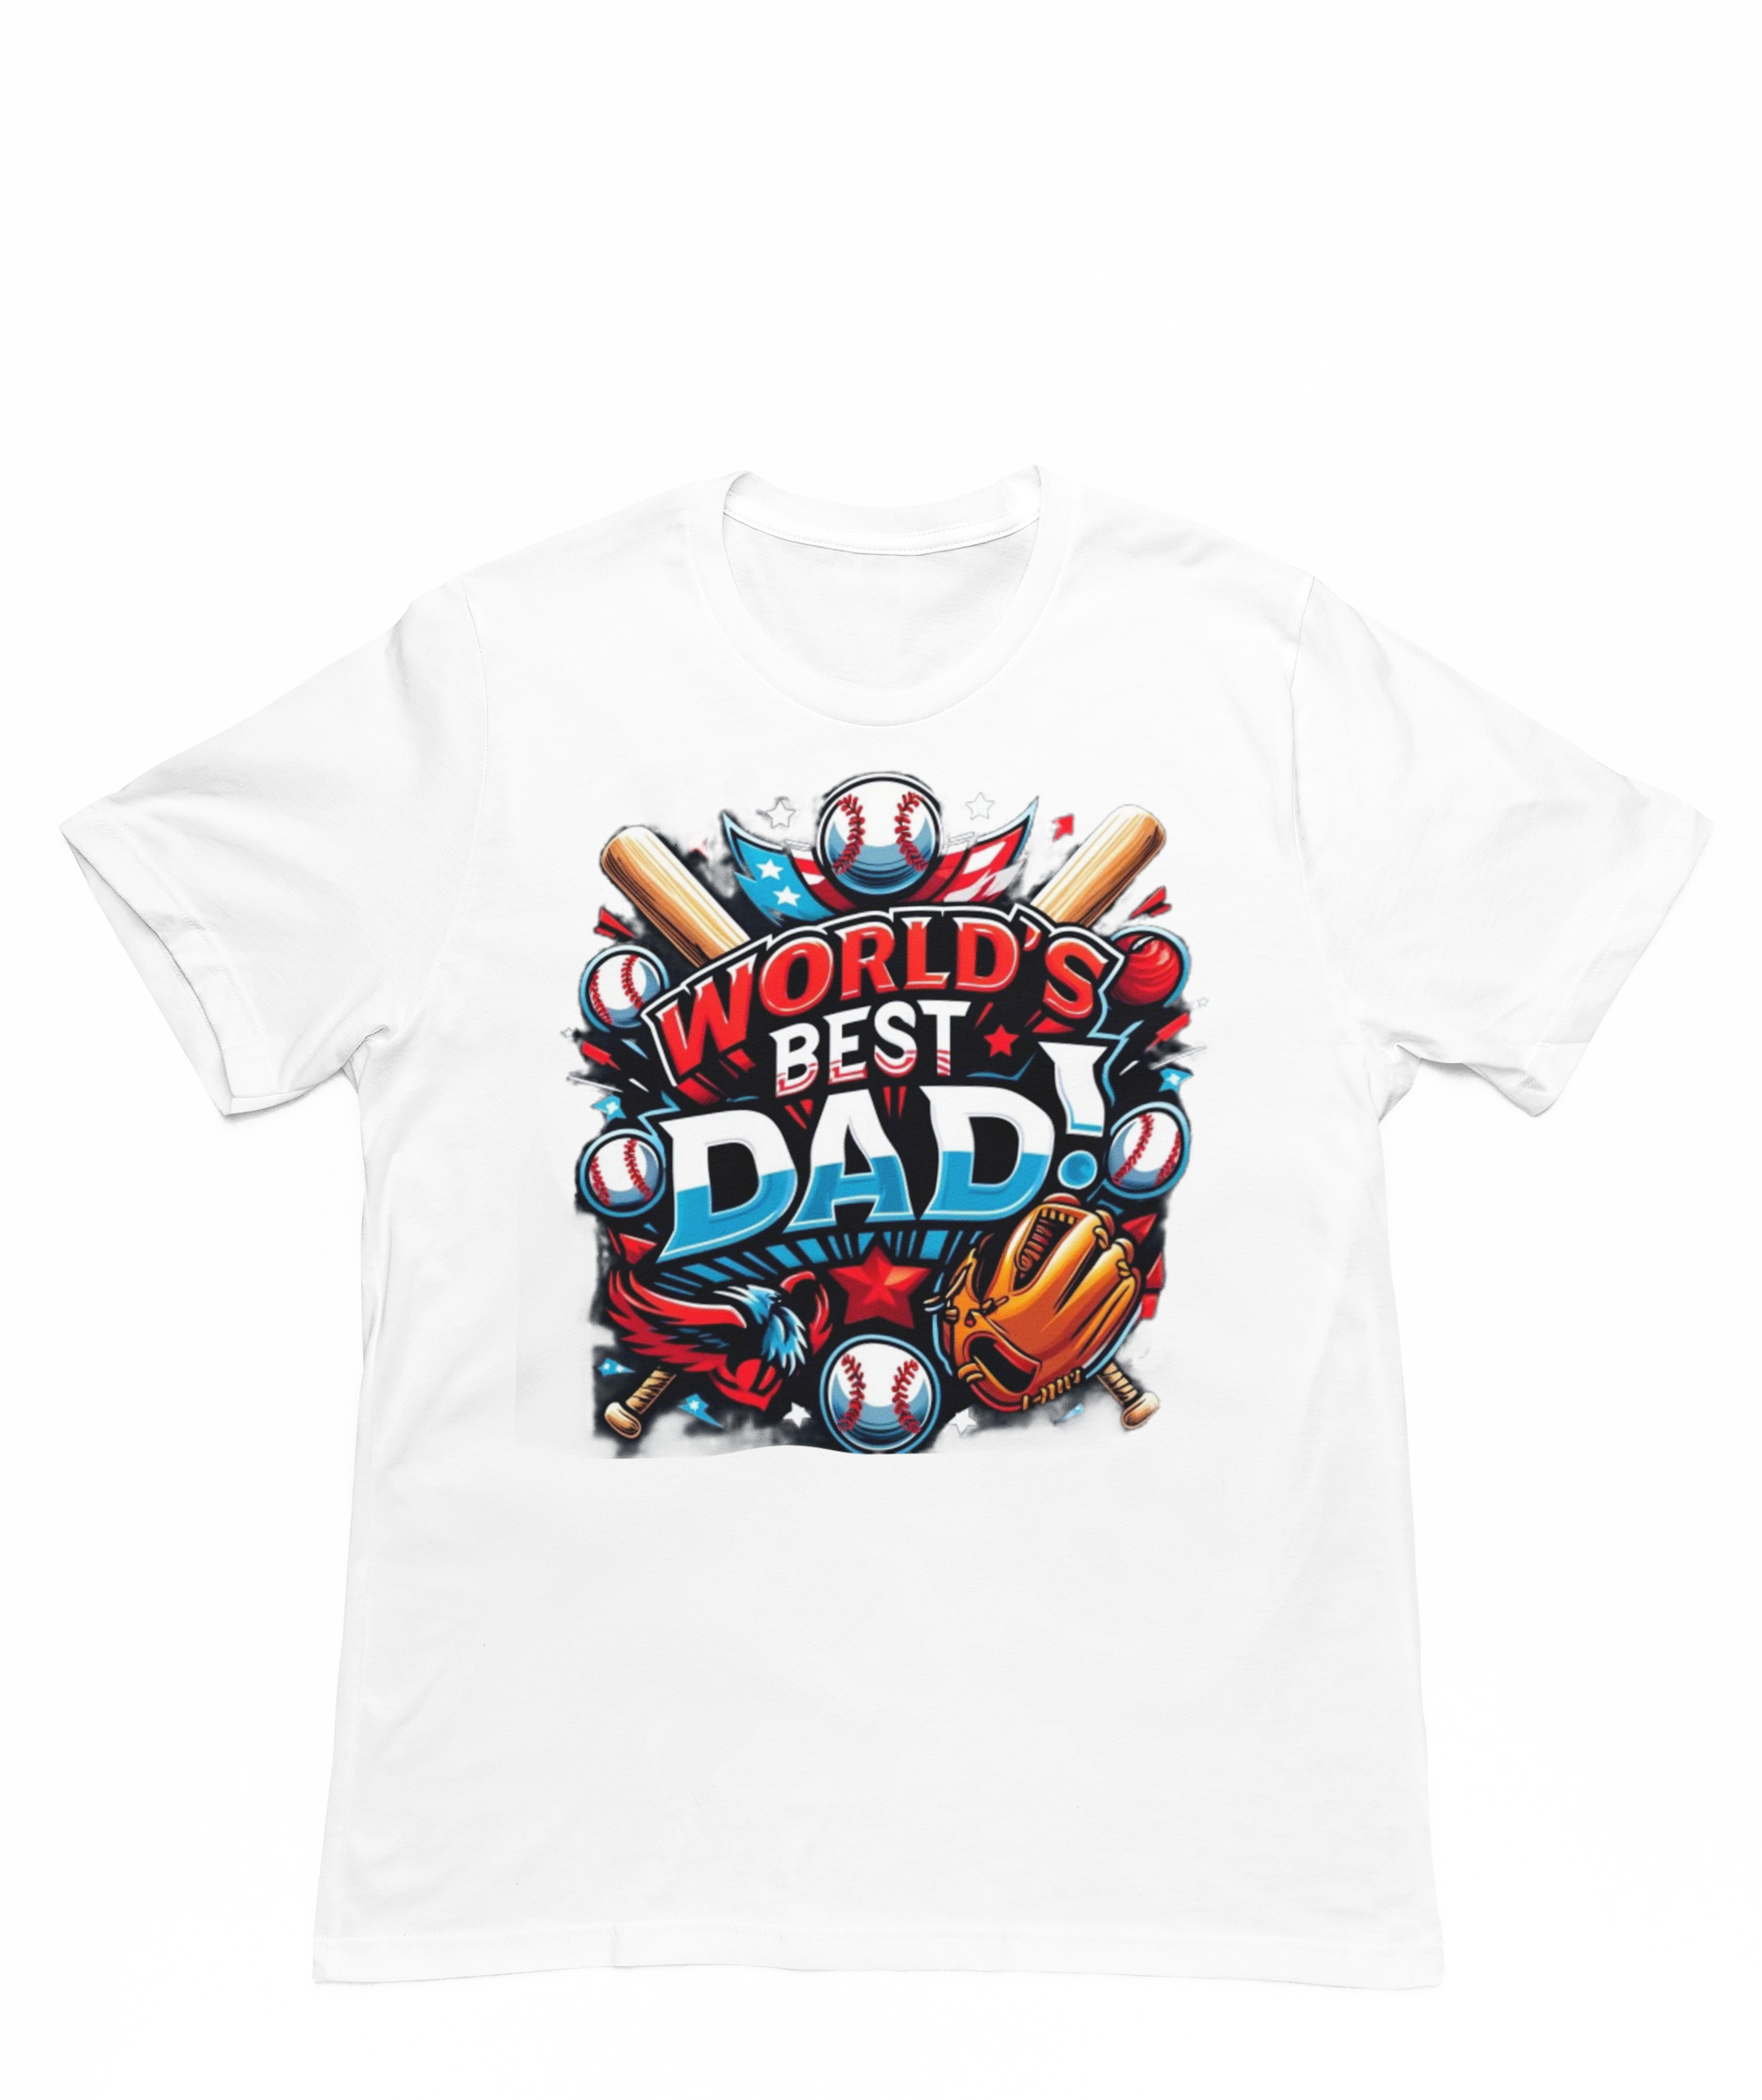 Worlds best dad t-shirt - Father's Day gift